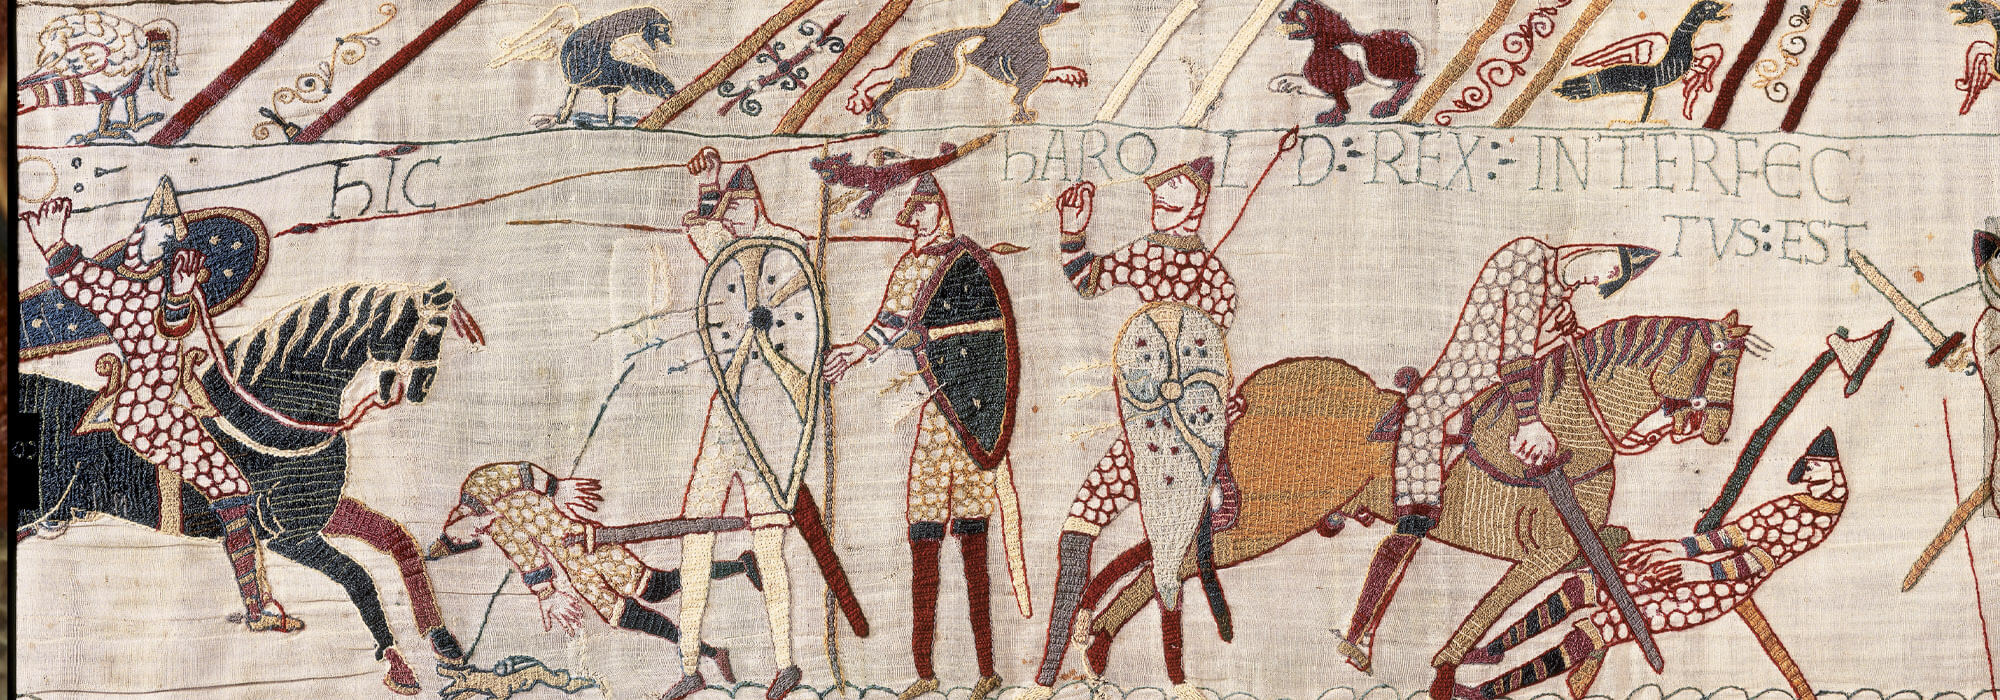 Learn about Battle of Hastings | The Royal Mint